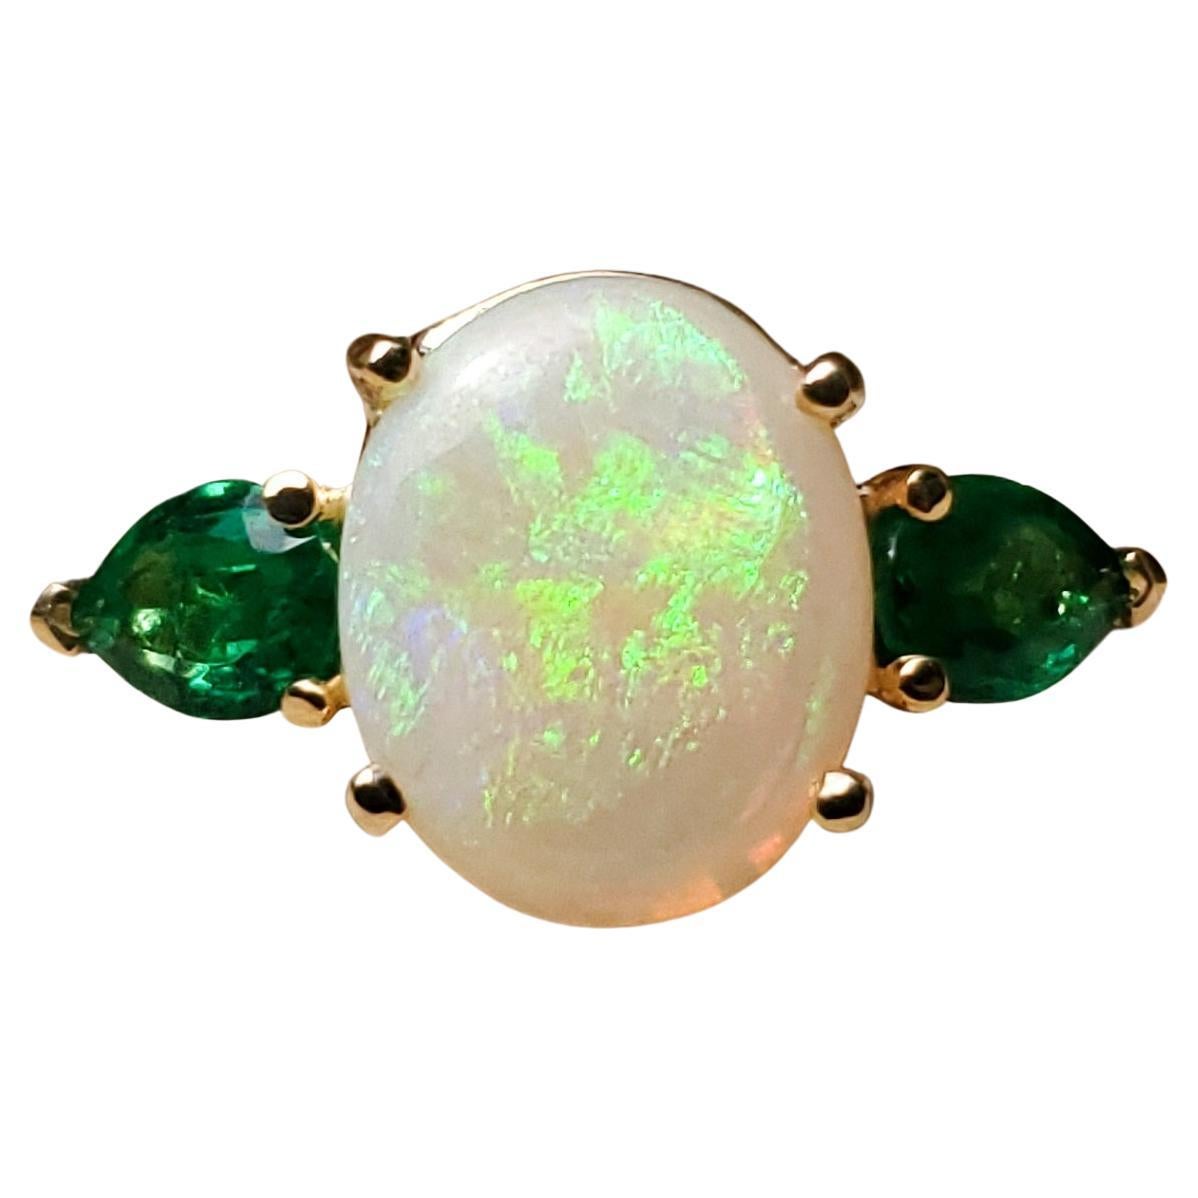 18K 1.76ct Opal and Emerald Ring